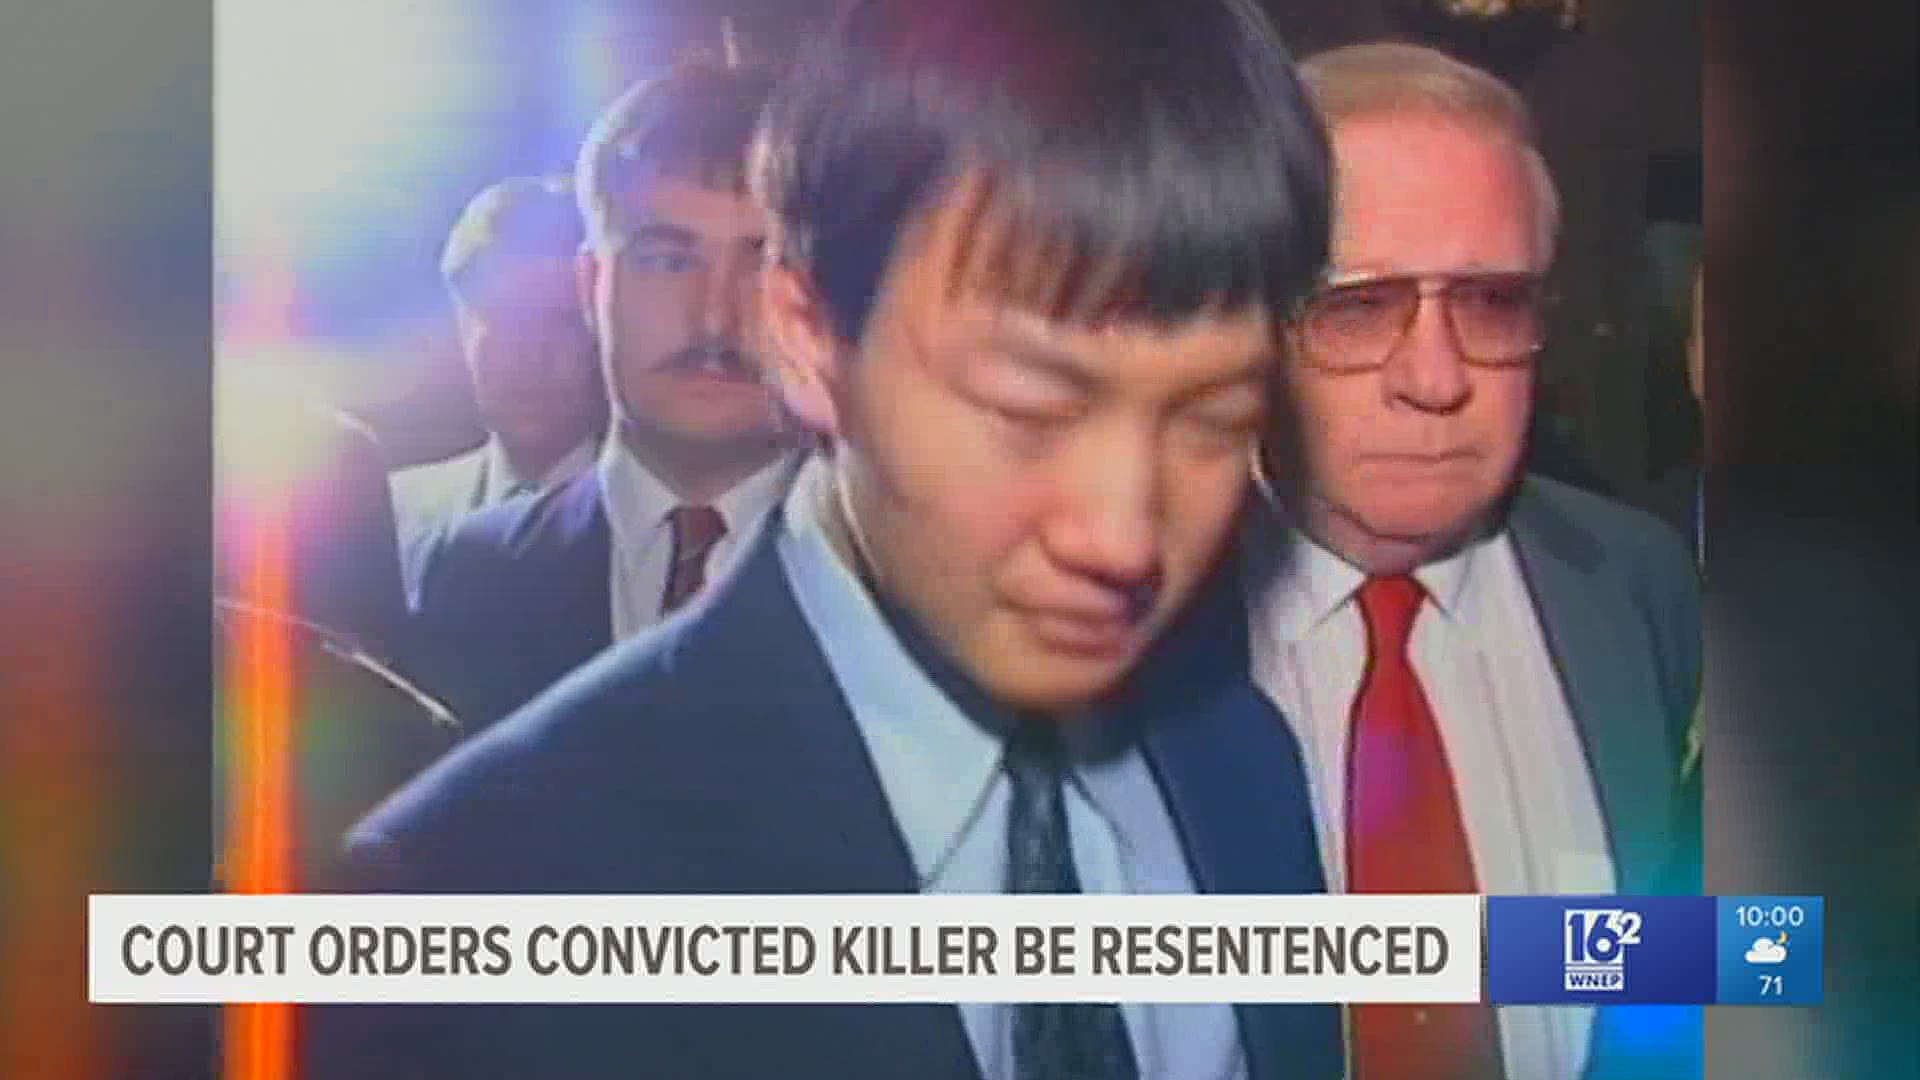 The court said it is more than likely Todd Tarselli, who grew up in Korea, was actually 17 at the time of the crime, yet, he was sentenced as an adult.